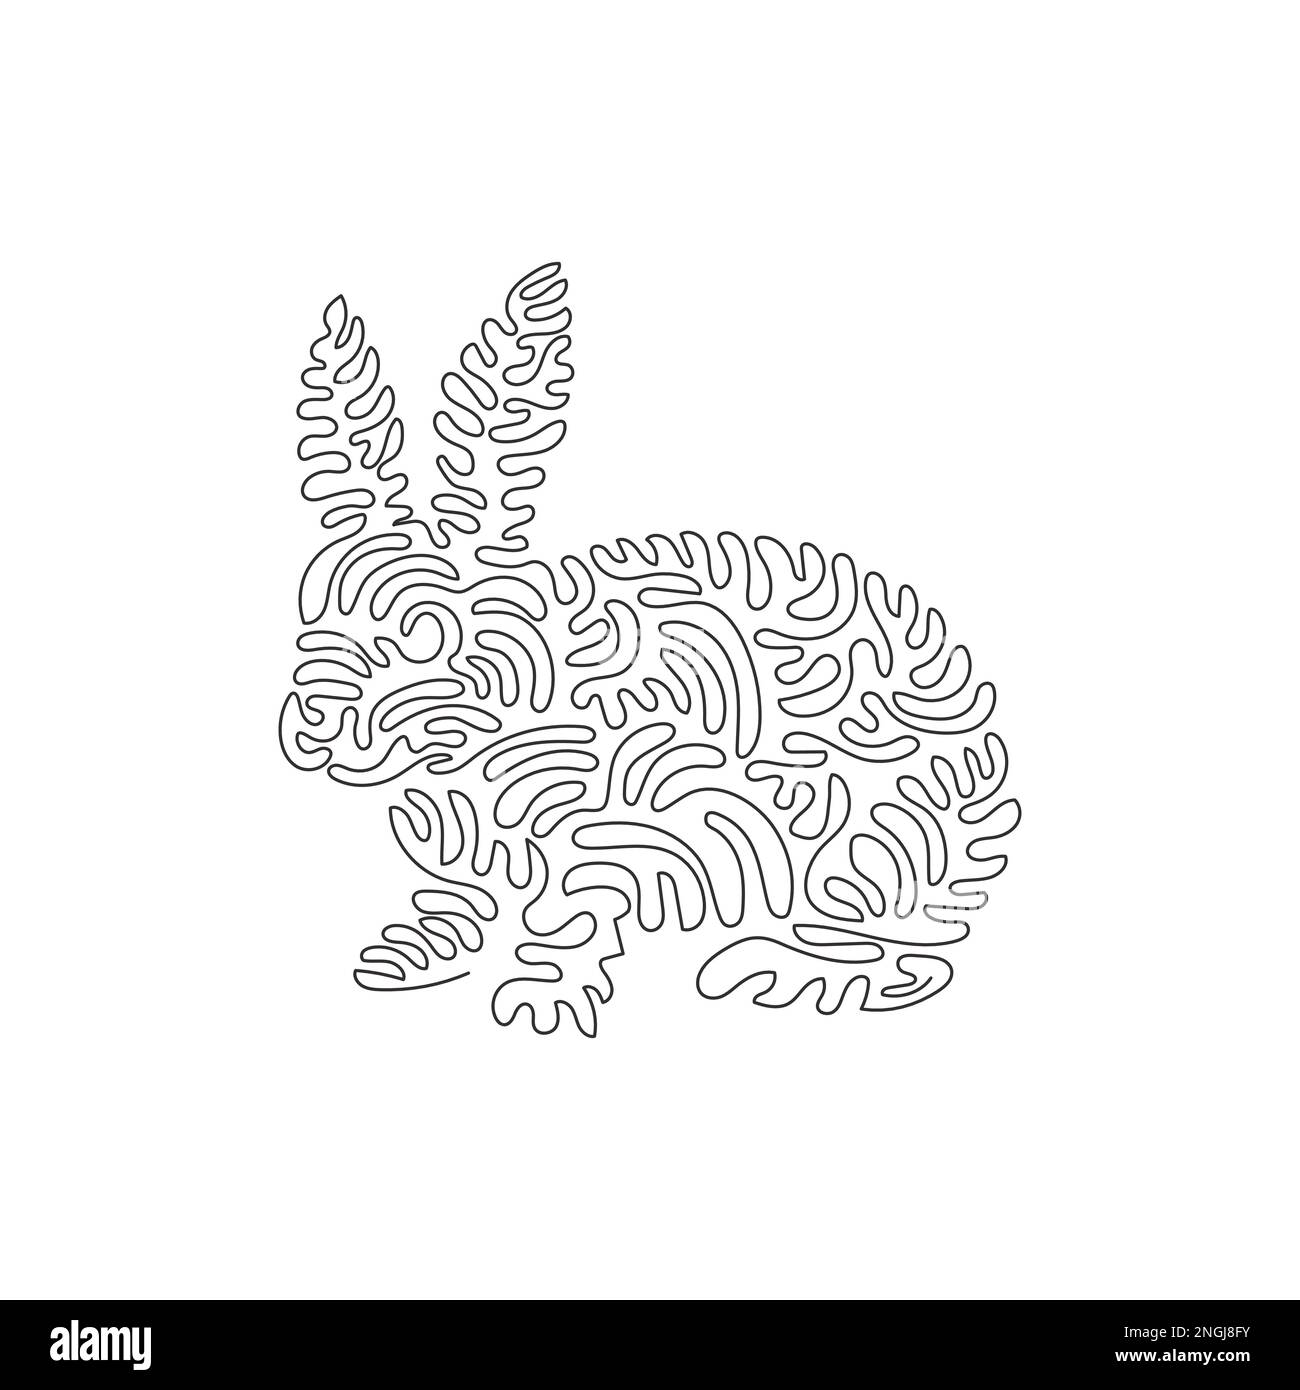 Single curly line drawing of cute rabbit abstract art. Continuous line drawing graphic design vector illustration of adorable rabbit for icon Stock Vector